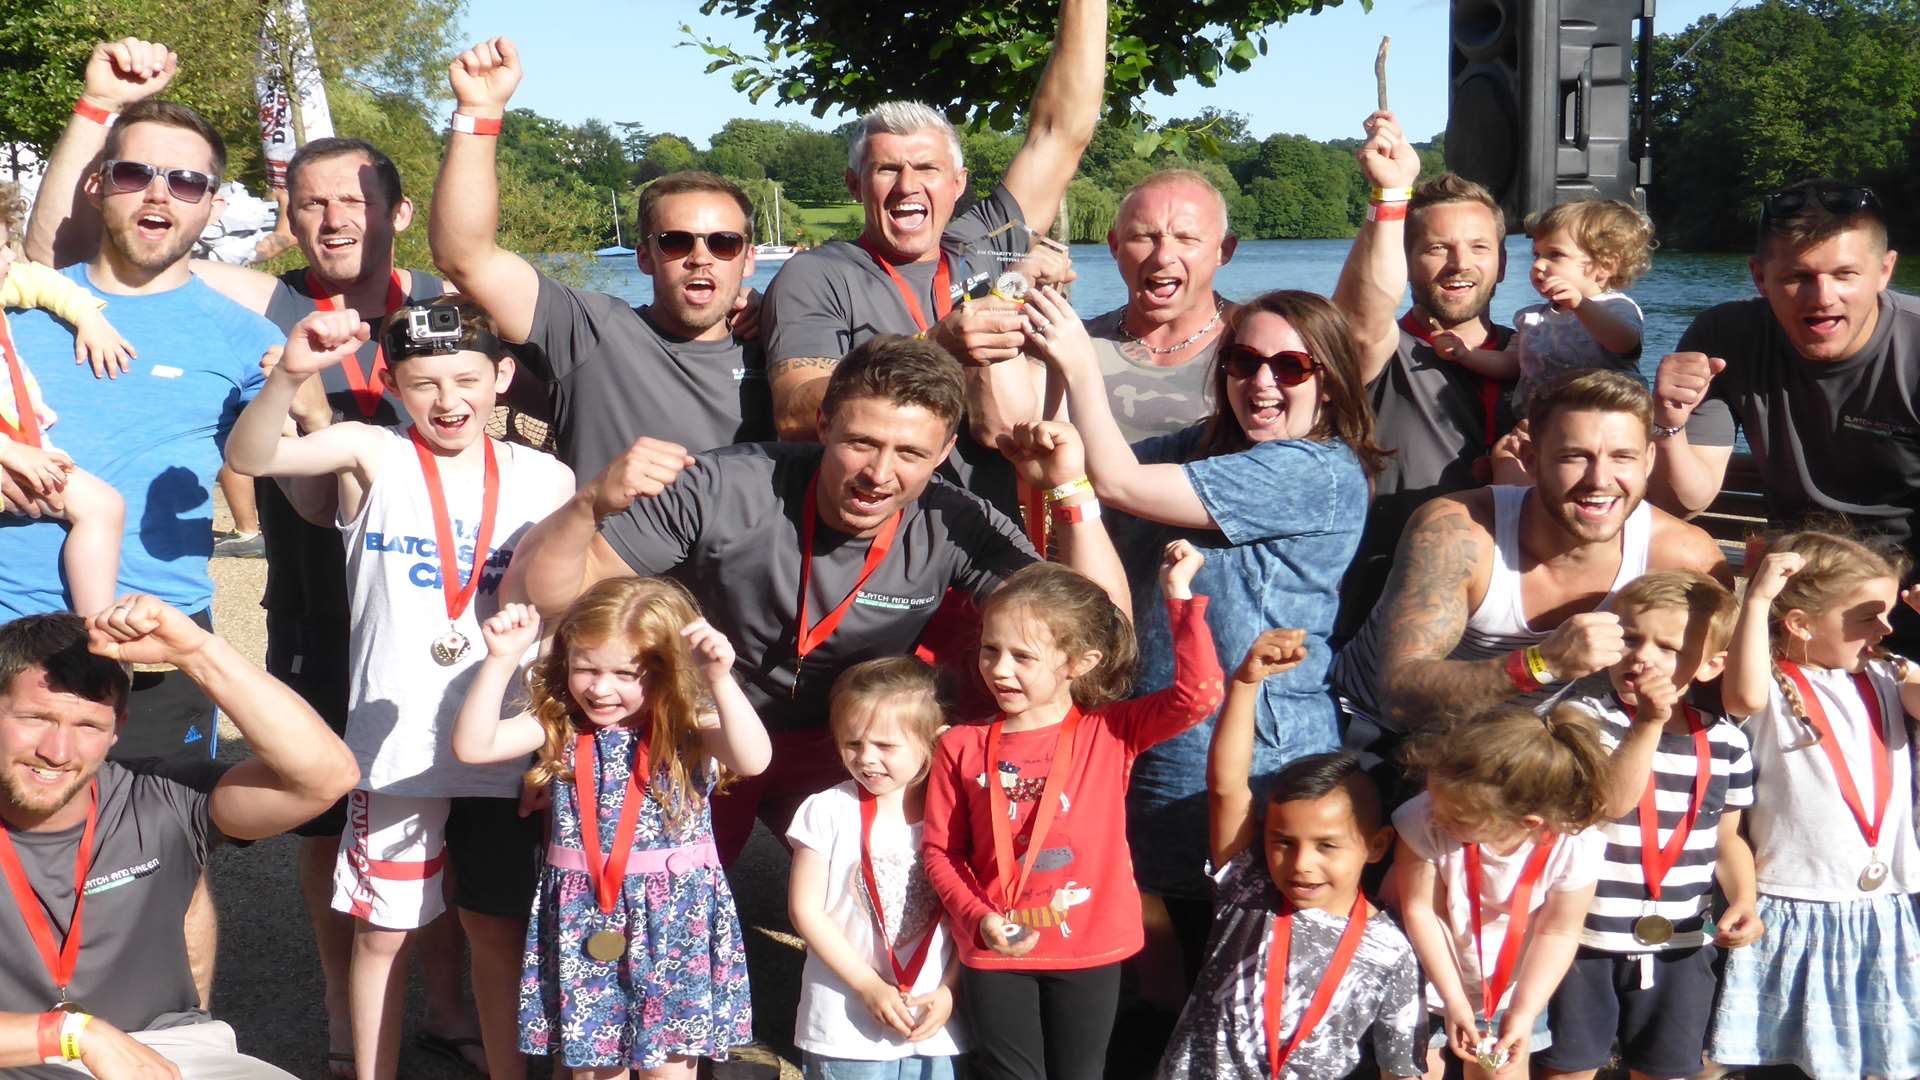 Polly Viccars of Kent Reliance presents Nick Green and Whitstable teams Blatch and Green with the winners trophy for the fifth time at the record-breaking 2016 KM Dragon Boat Race.